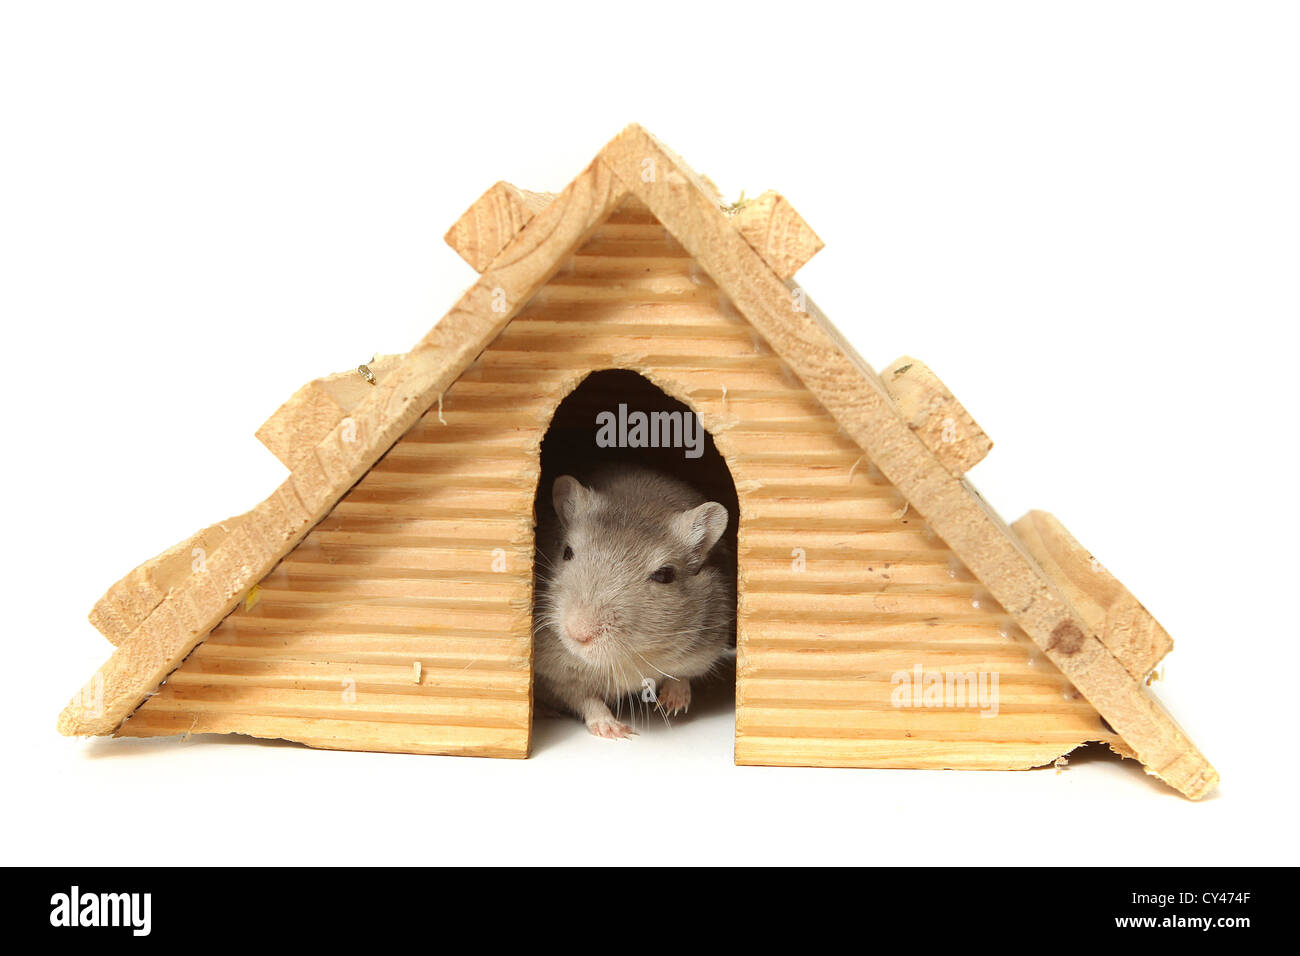 Humour. Successful mouse living in a wooden house. On white Background Stock Photo